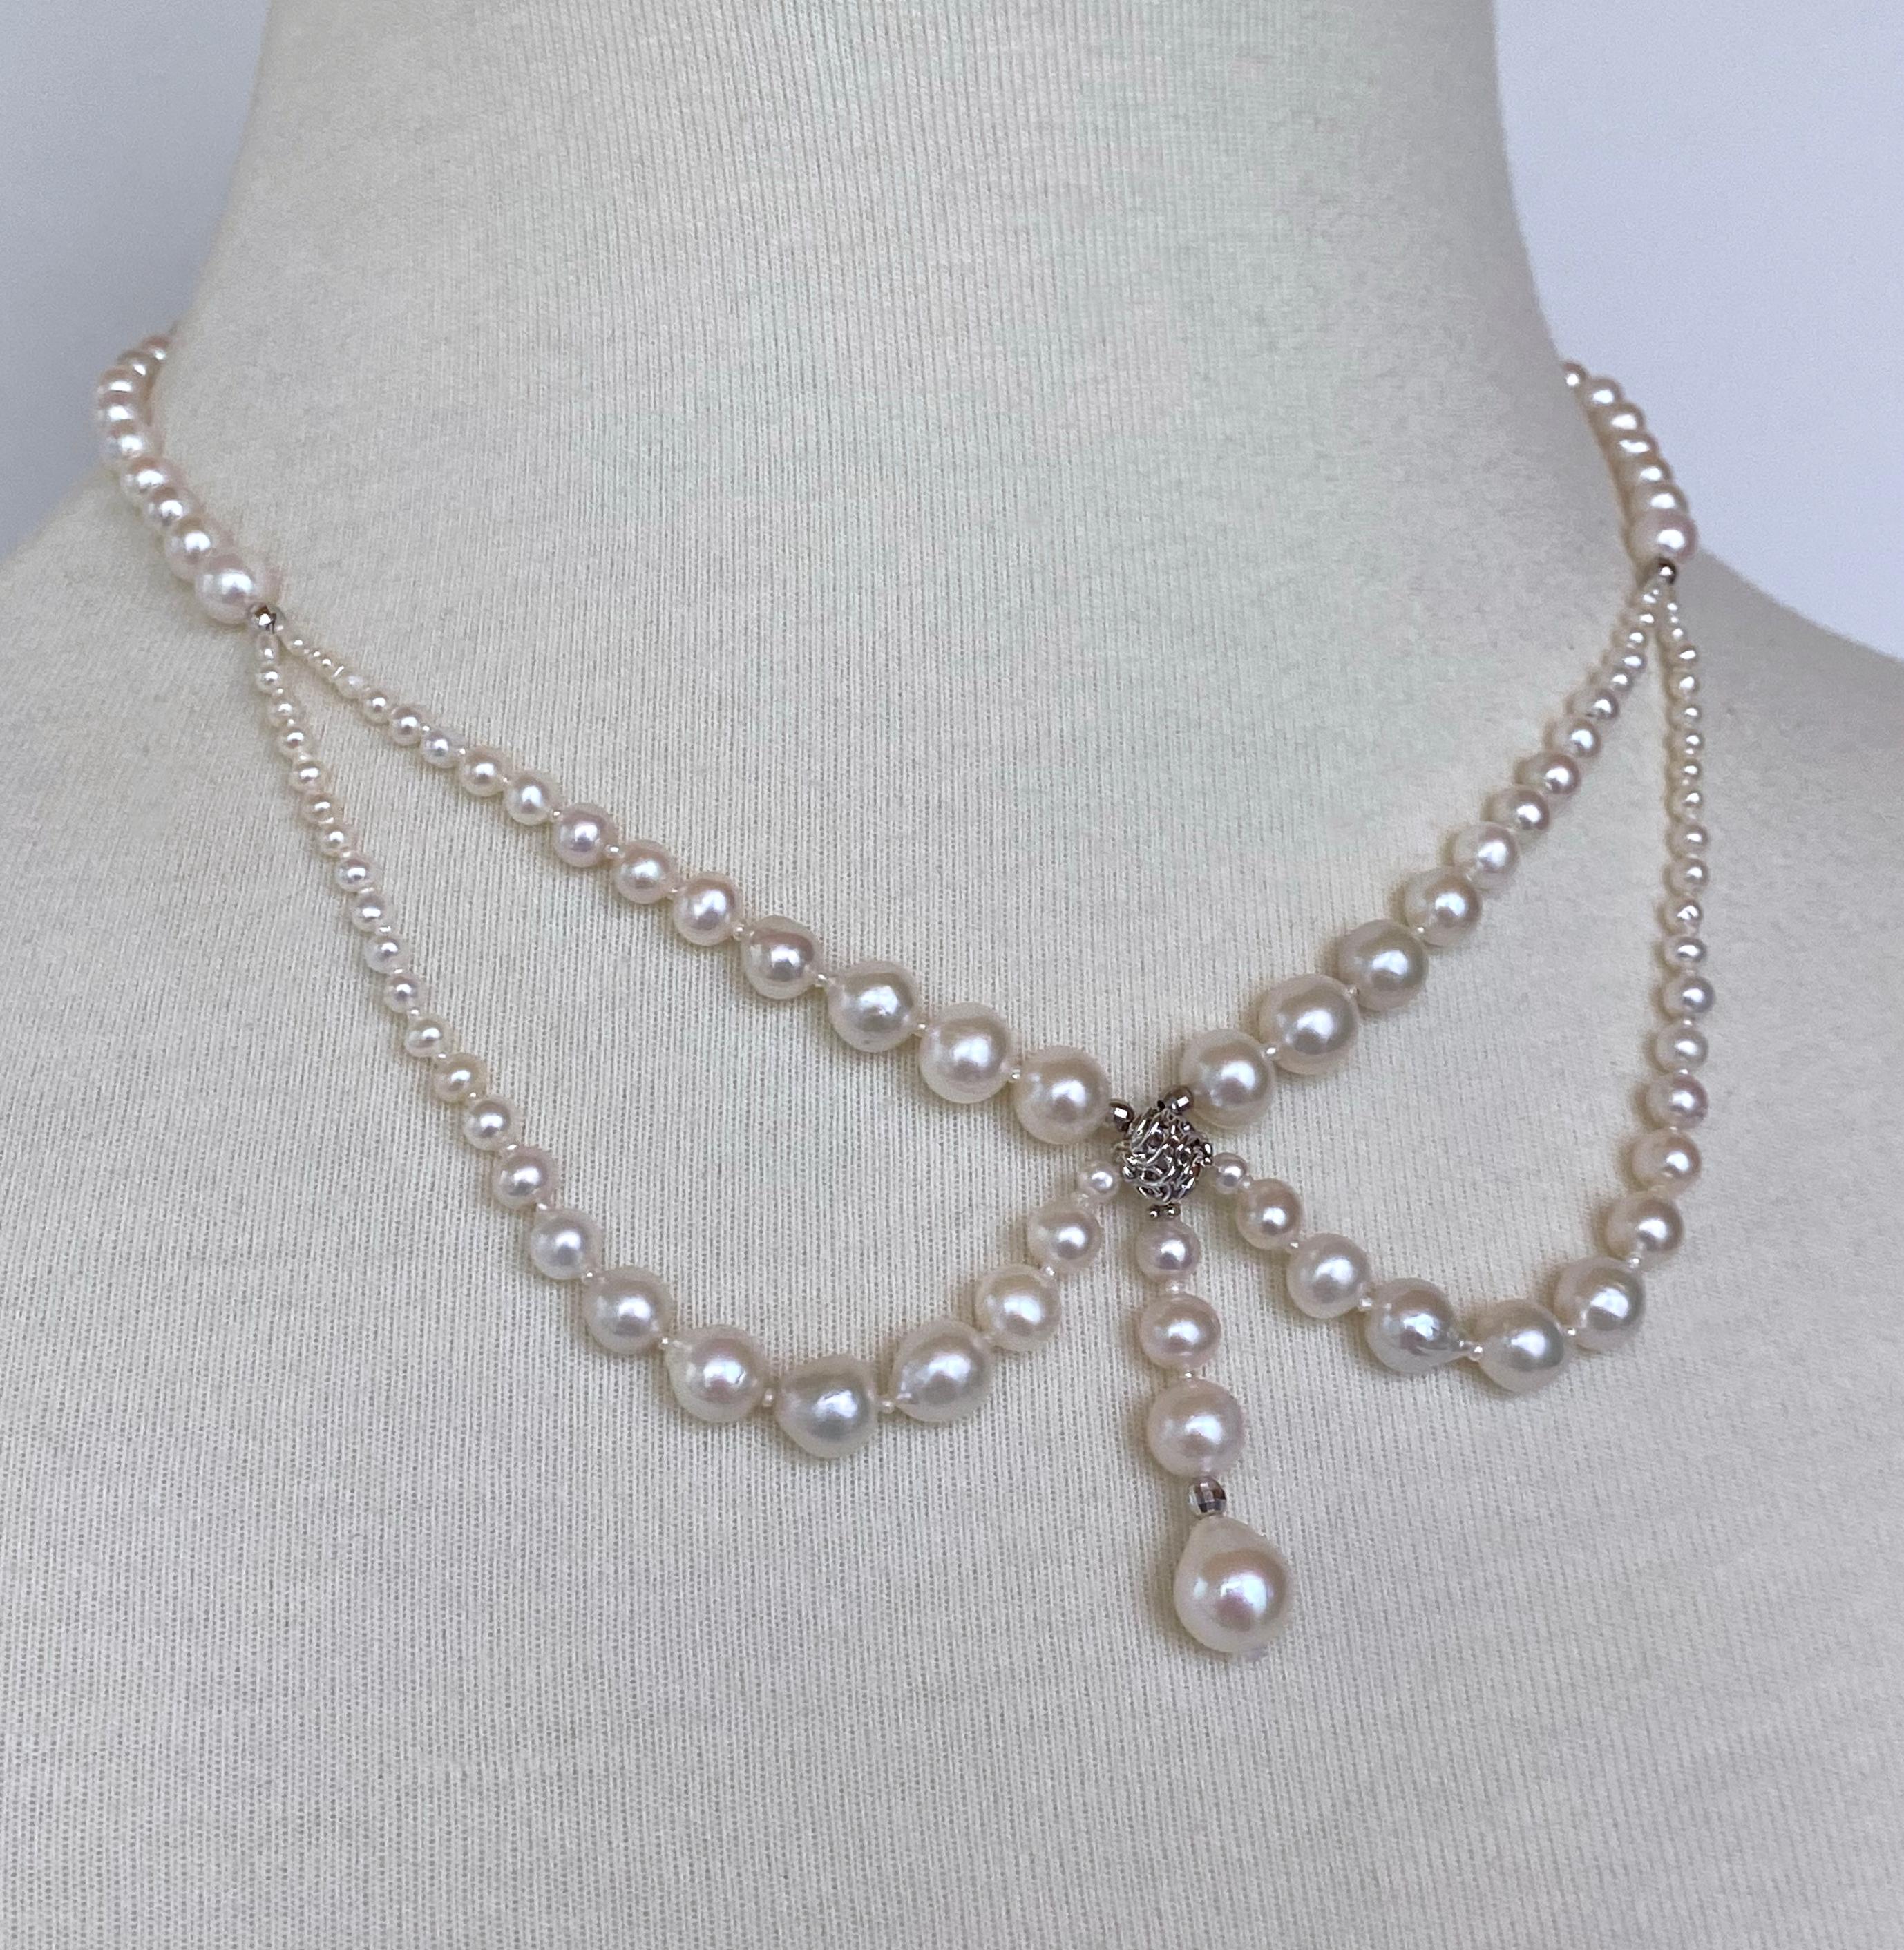 Artisan Marina J. Victorian Inspired Draped Pearl and Silver Rhodium PlatedNecklace For Sale